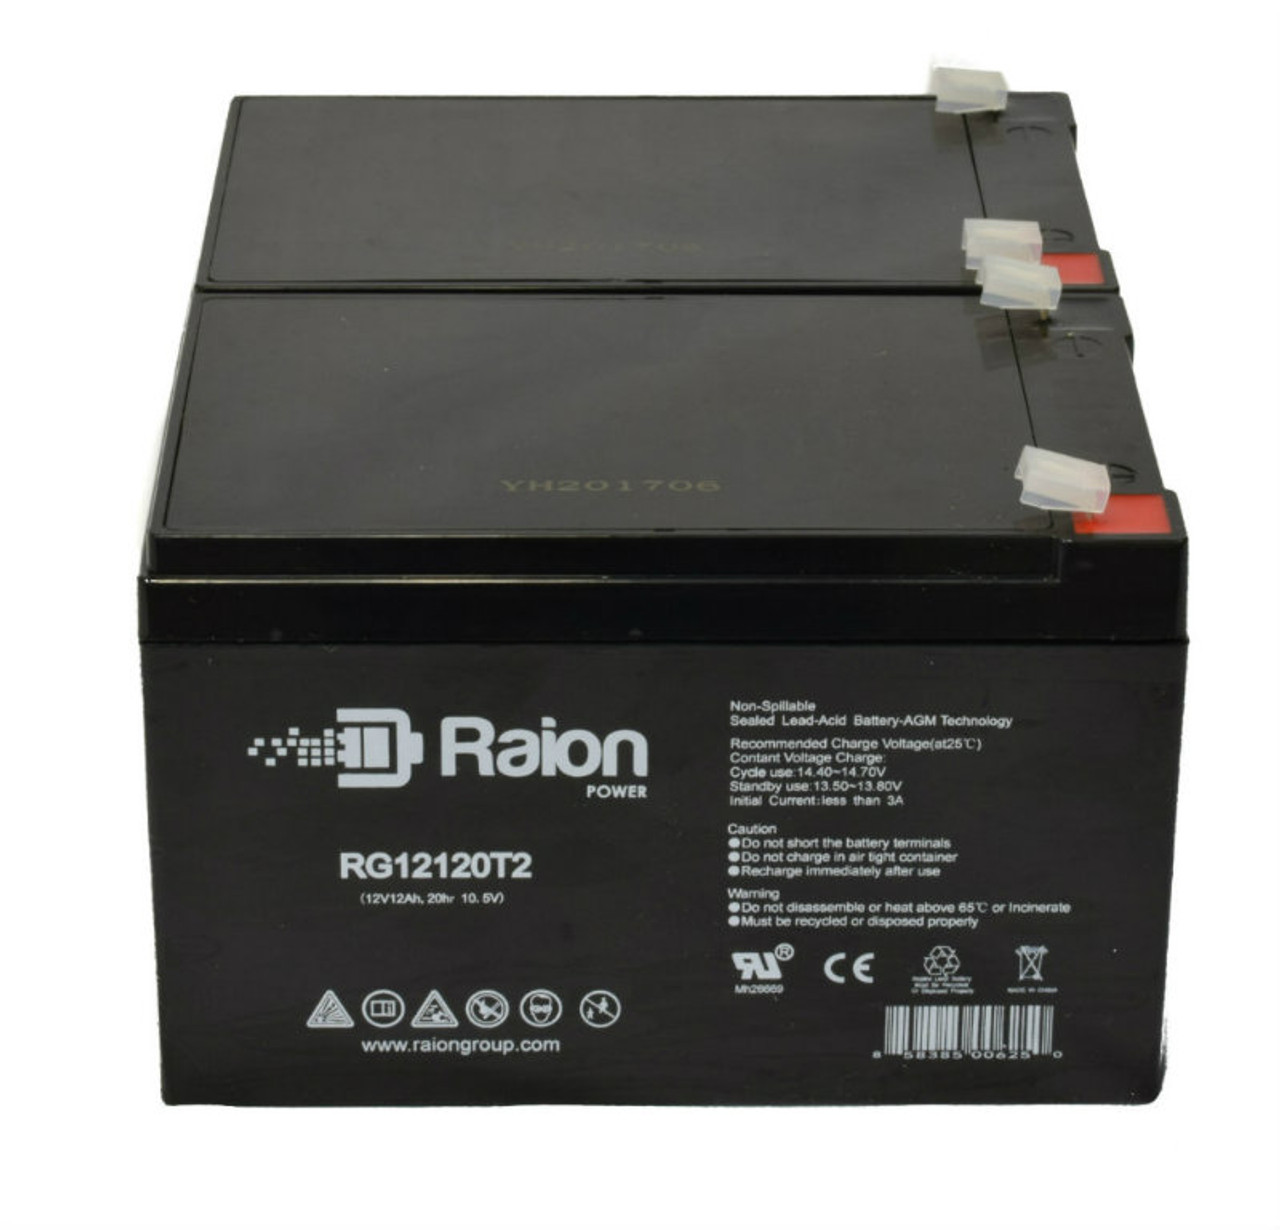 Raion Power 12V 12Ah Non-Spillable Compatible Replacement Battery for TLV12120 - (2 Pack)